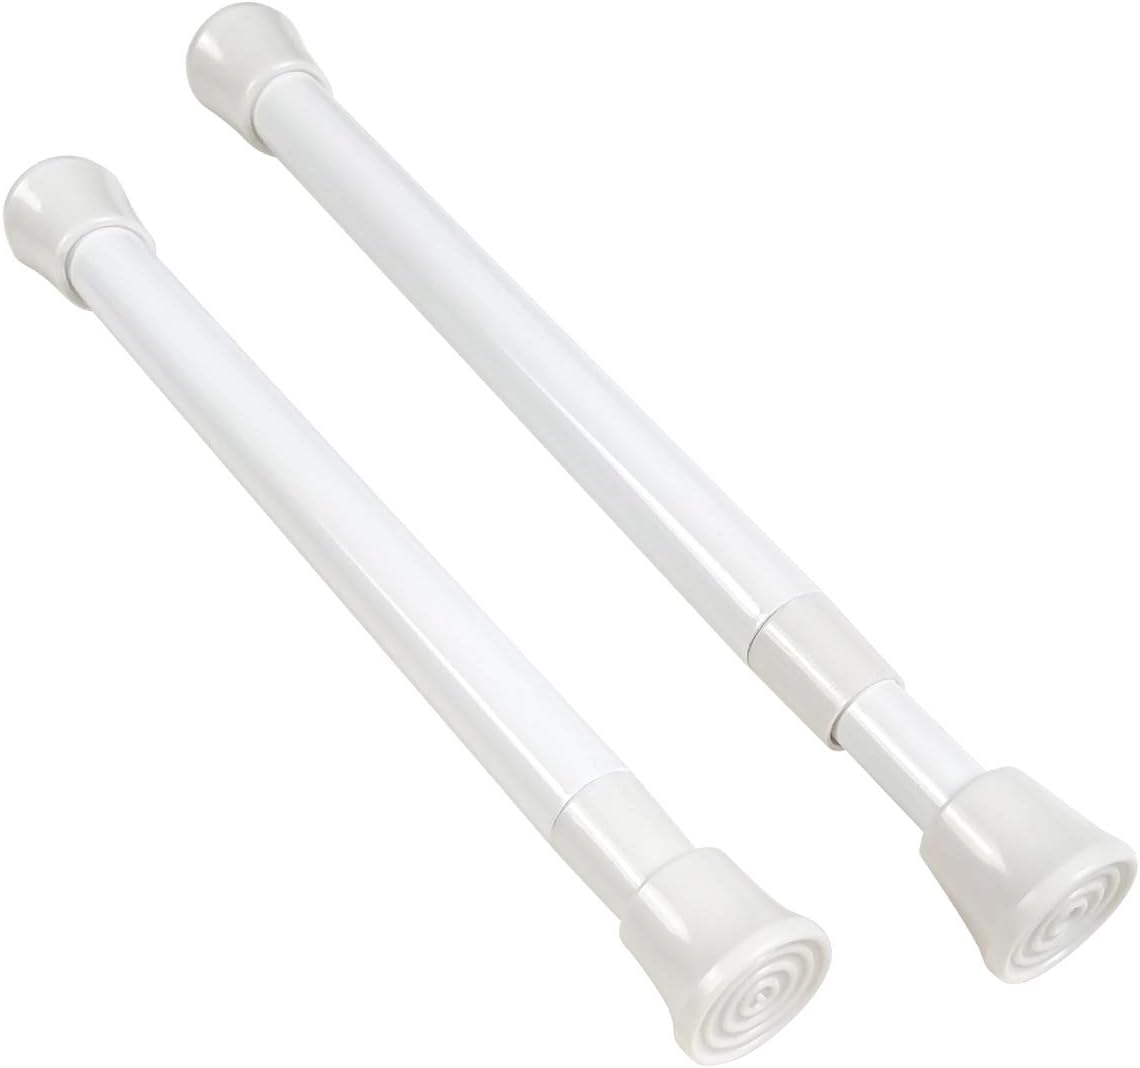 KXLIFE 2 Pack Small Spring Tension Curtain Rod for Window Cupboard Closet White, 